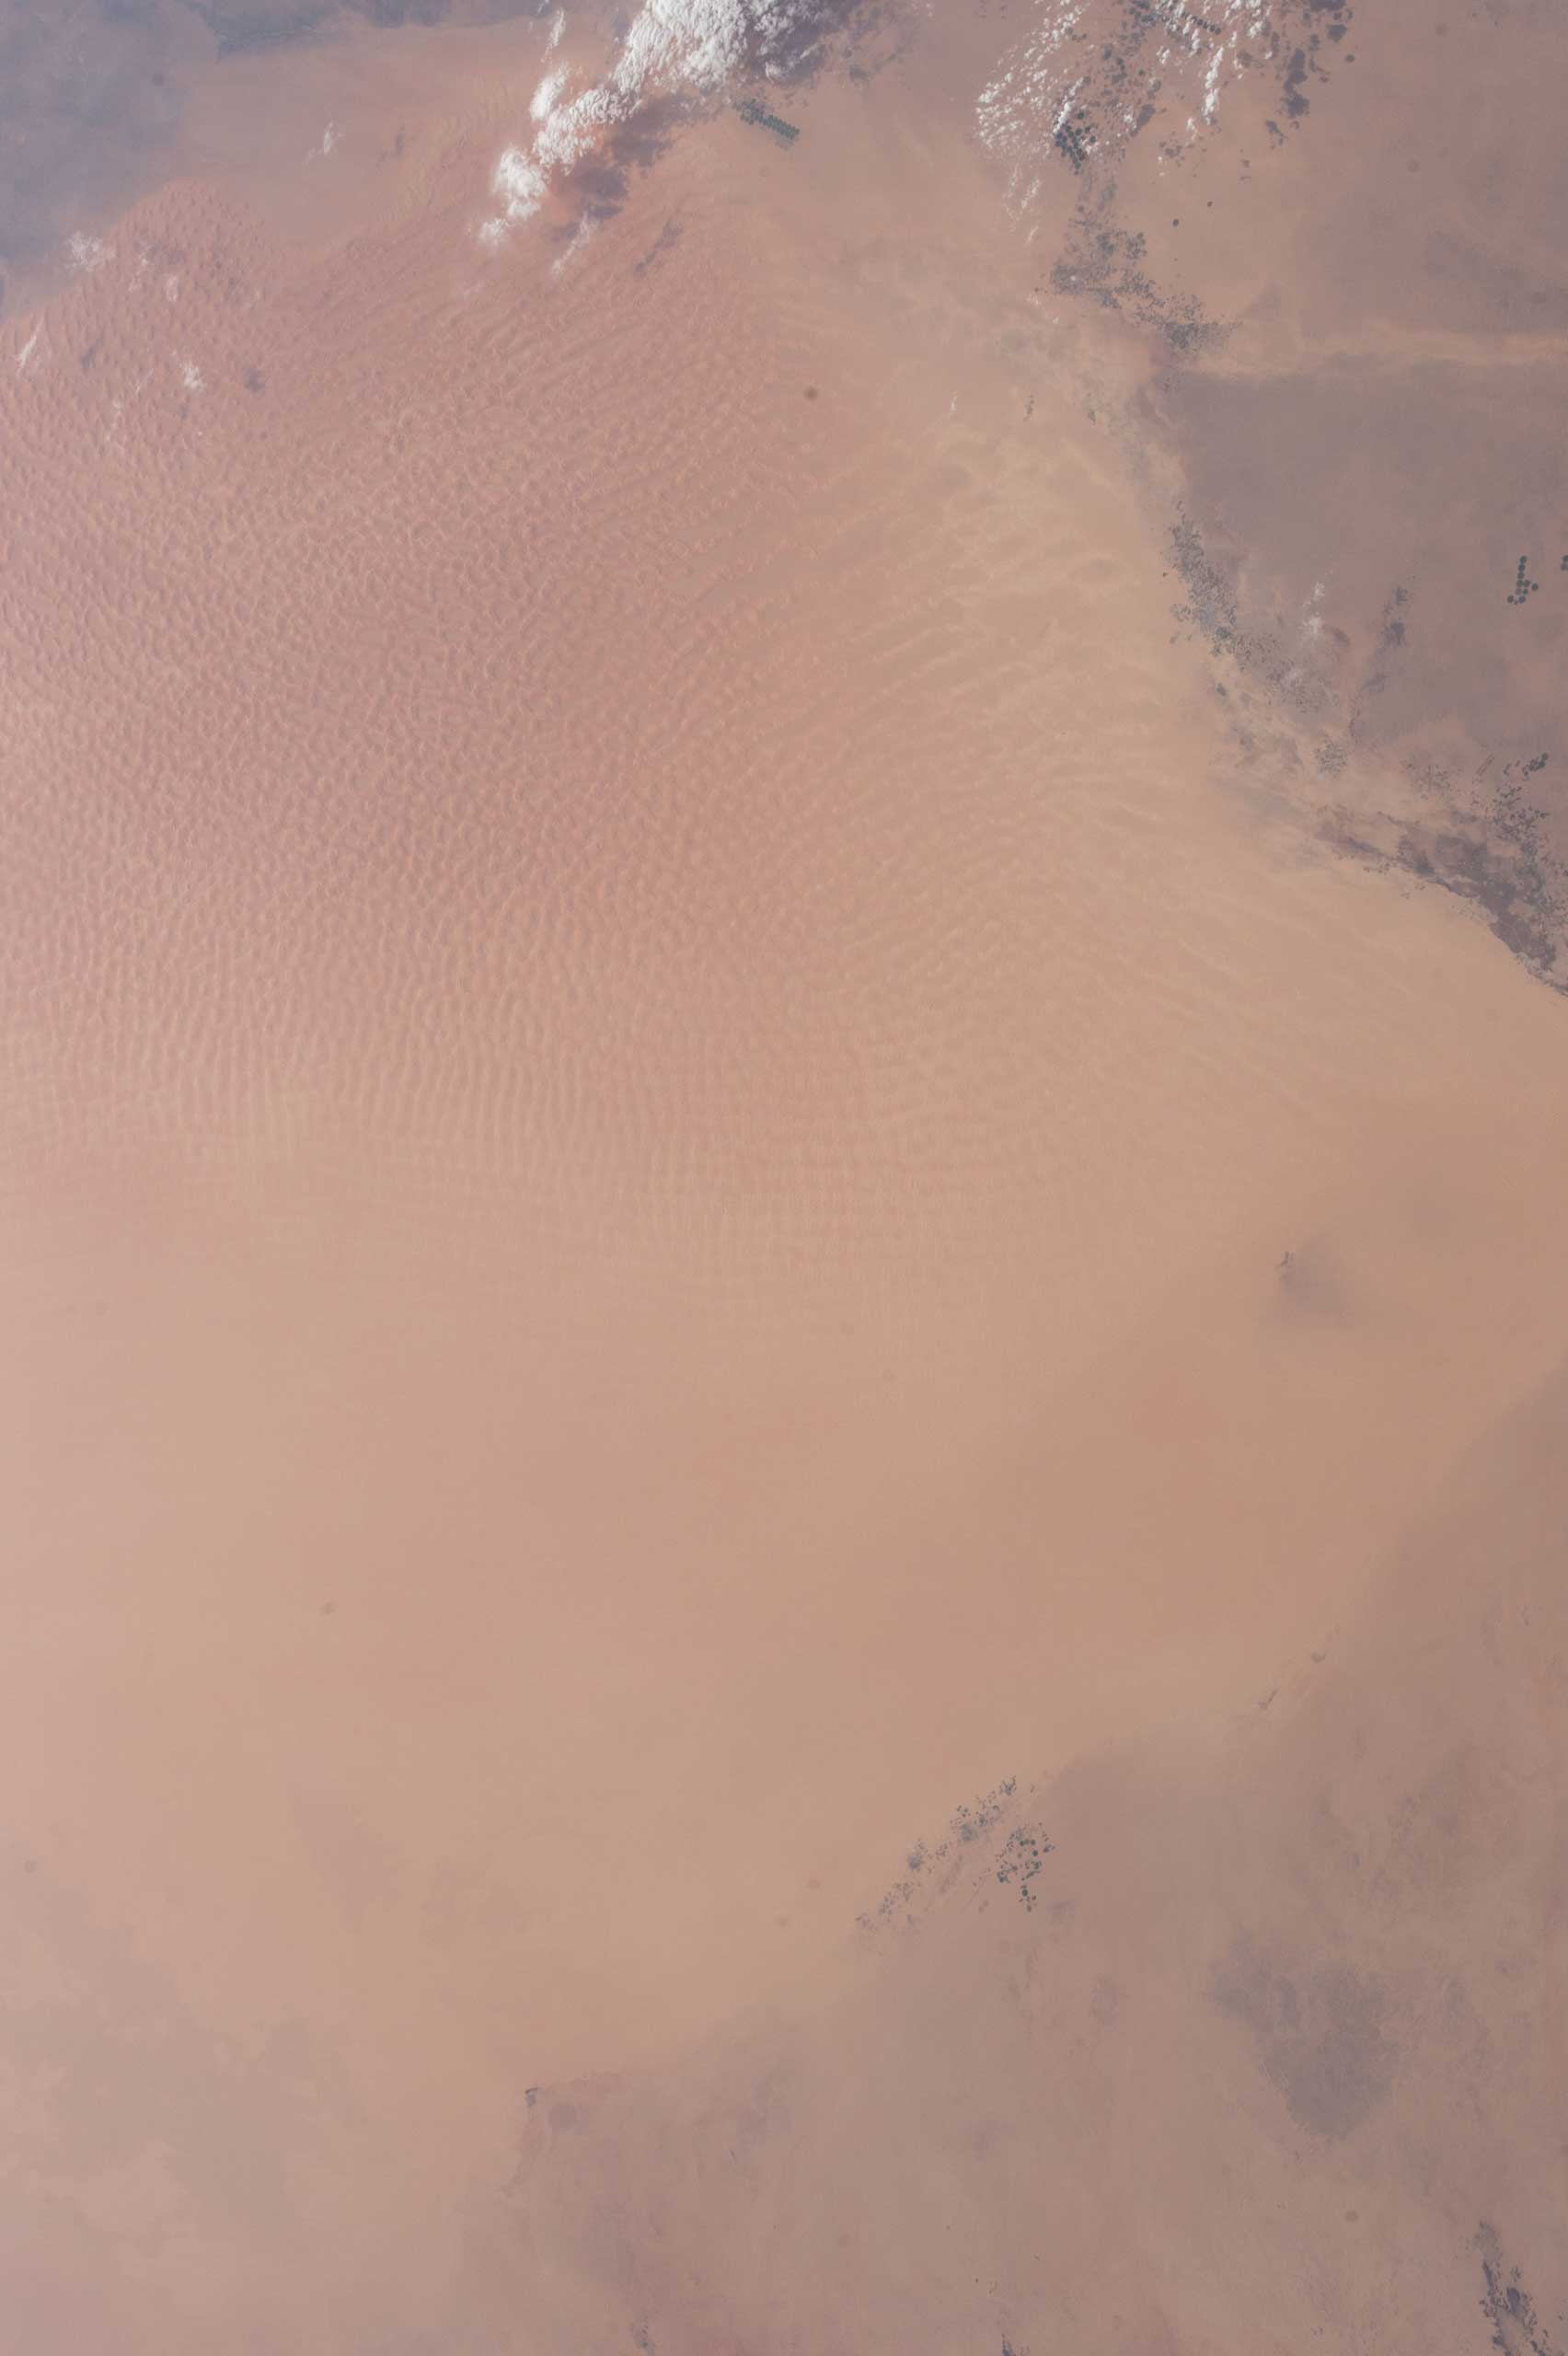 This huge Desert in northern Africa is an image tweeted by NASA astronaut Terry Virts on Feb. 11, 2015 from the International Space Station. He wanted to share with his Twitter fans the enormous size of the Murzuq Desert